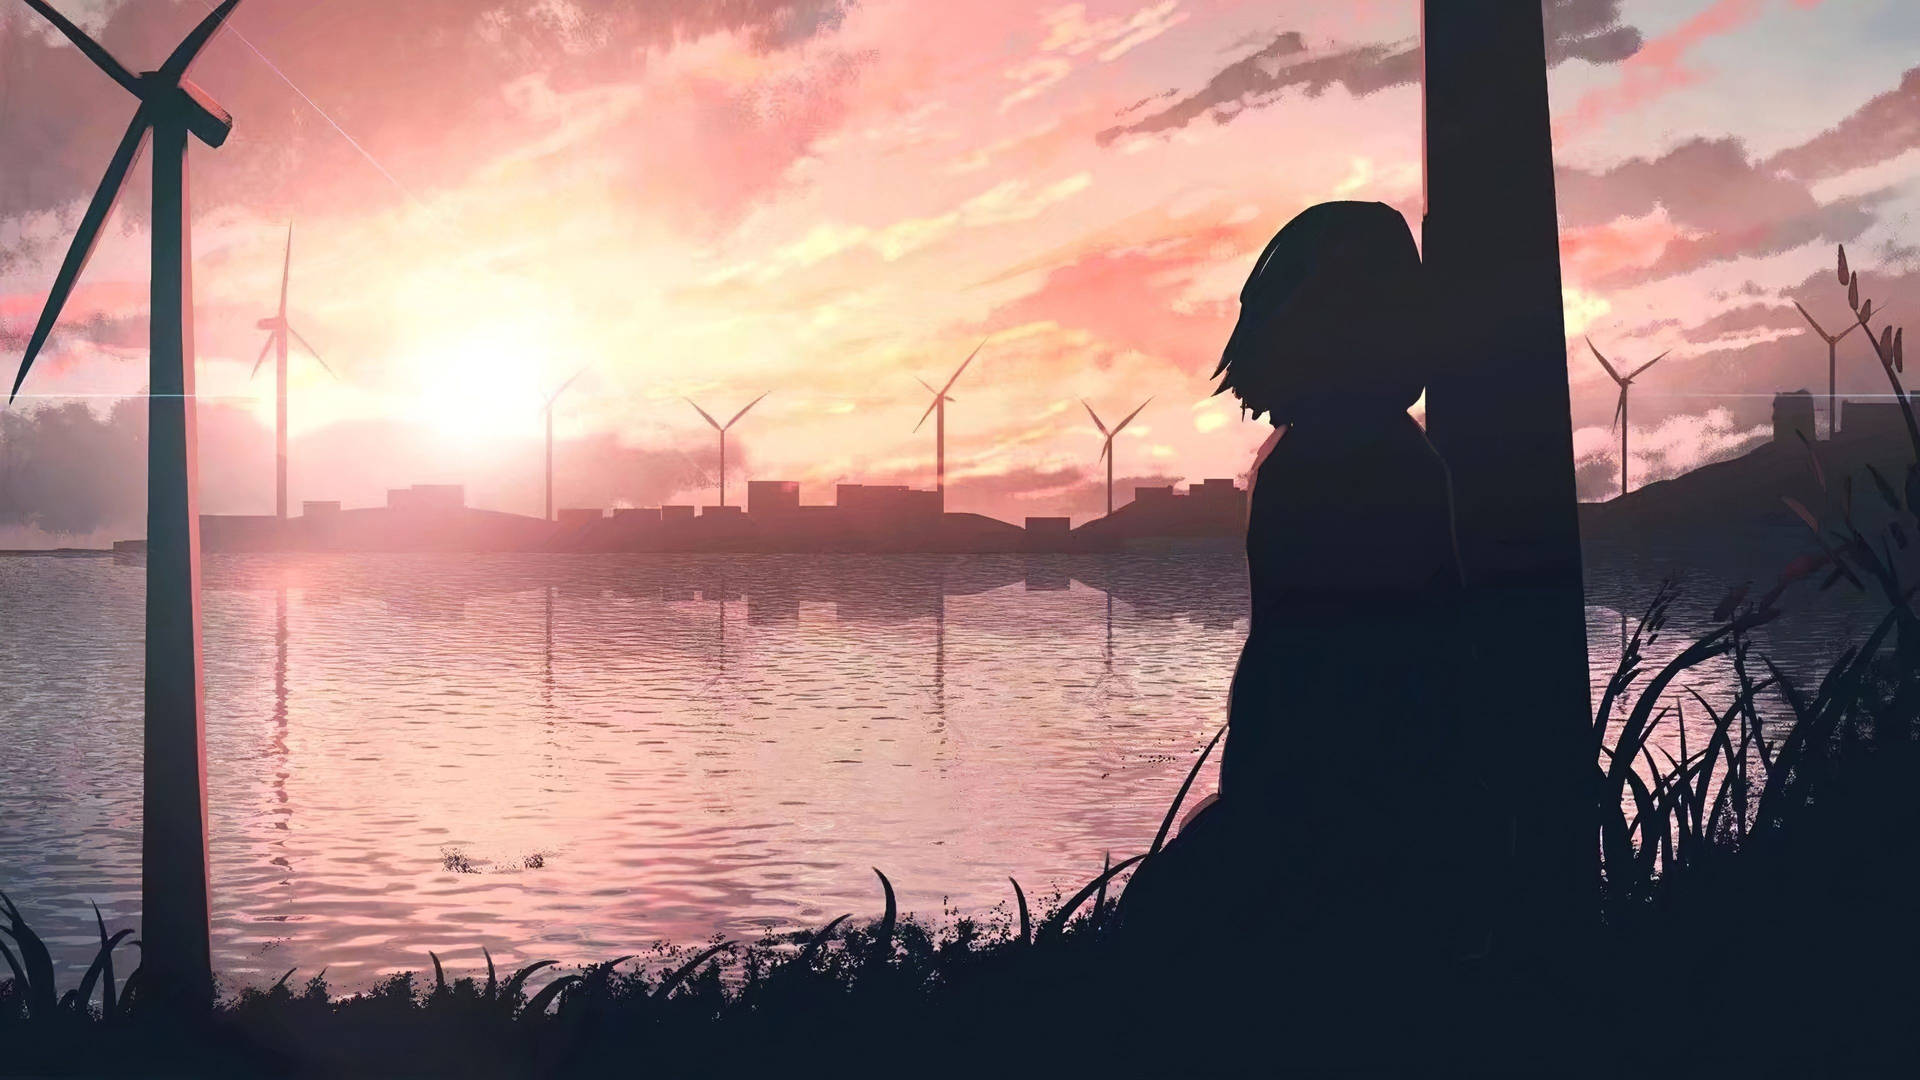 Anime Girl Sad Alone By Lake With Windmills Background